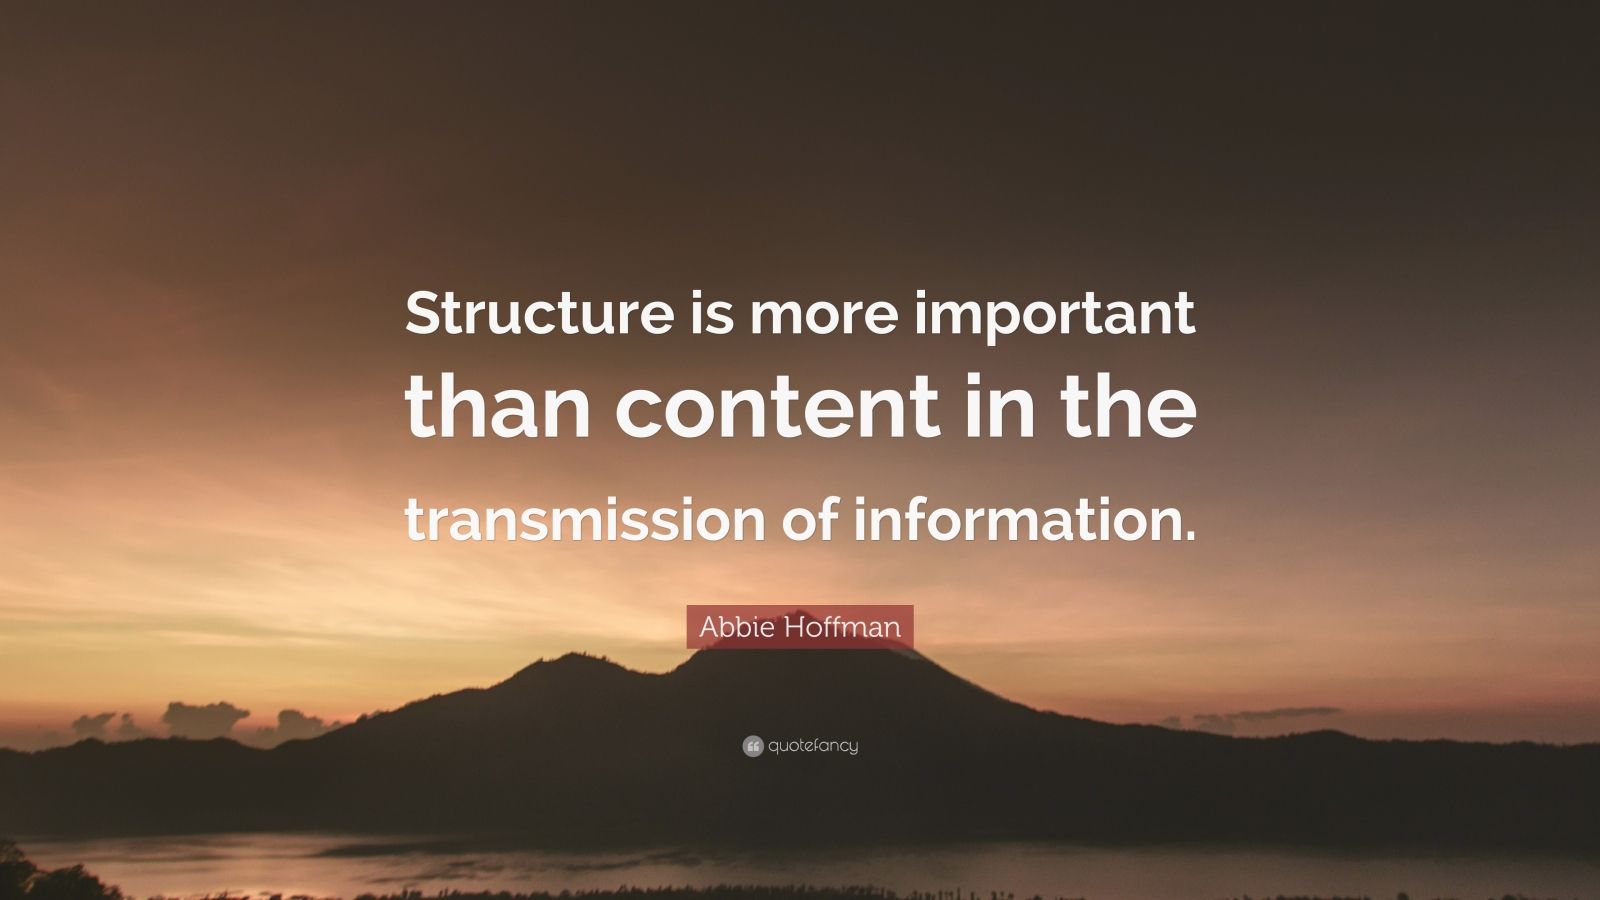 Abbie Hoffman Quote: “Structure is more important than content in the ...